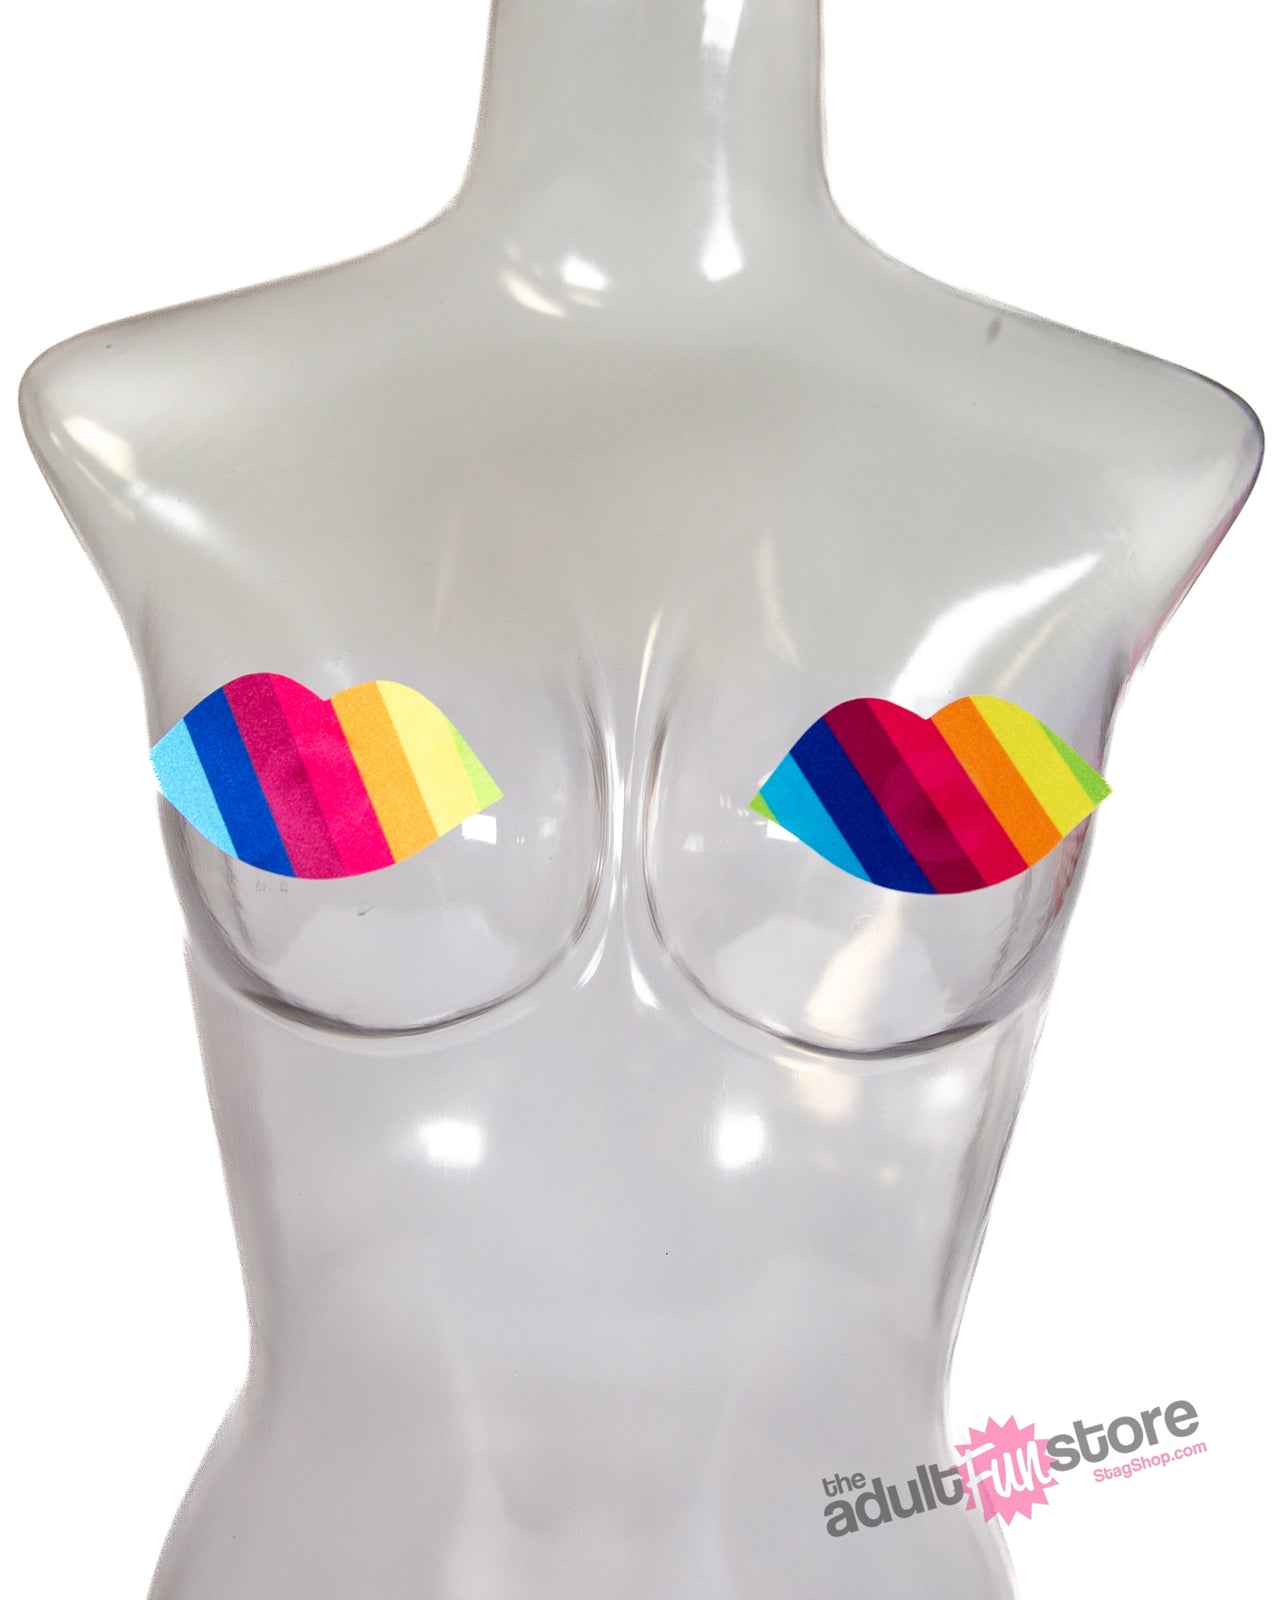 Hott Products - Rainbow Nipplicious Pasties - 2 Pair - Stag Shop